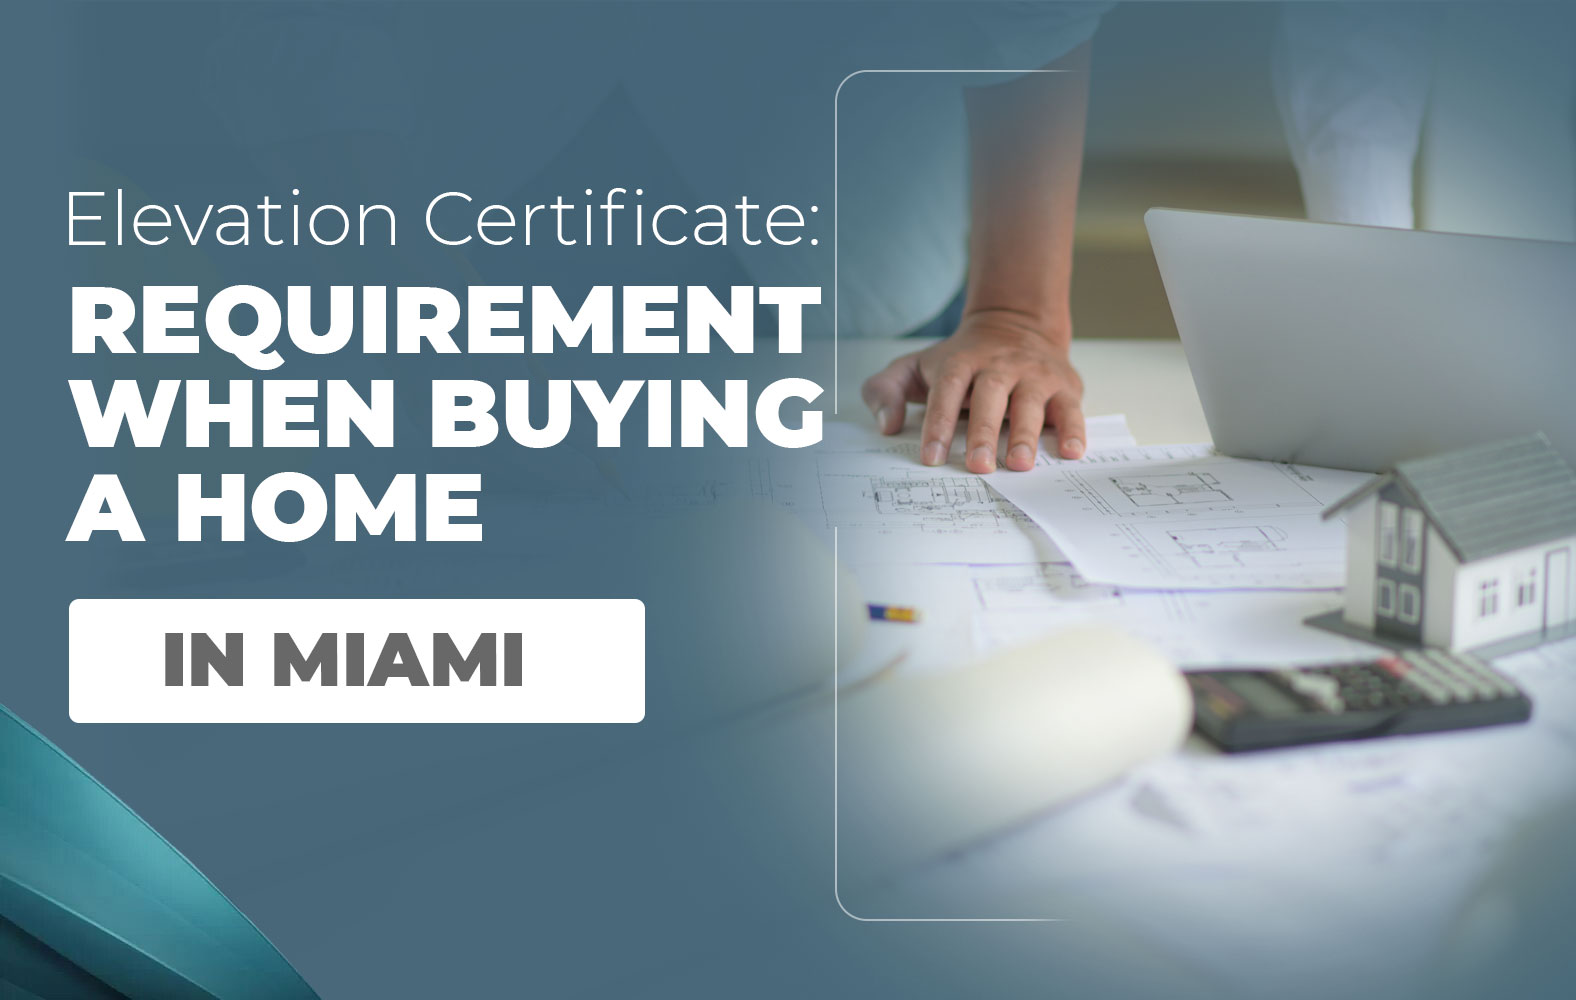 Elevation Certificate: A requirement when buying a home in Miami.